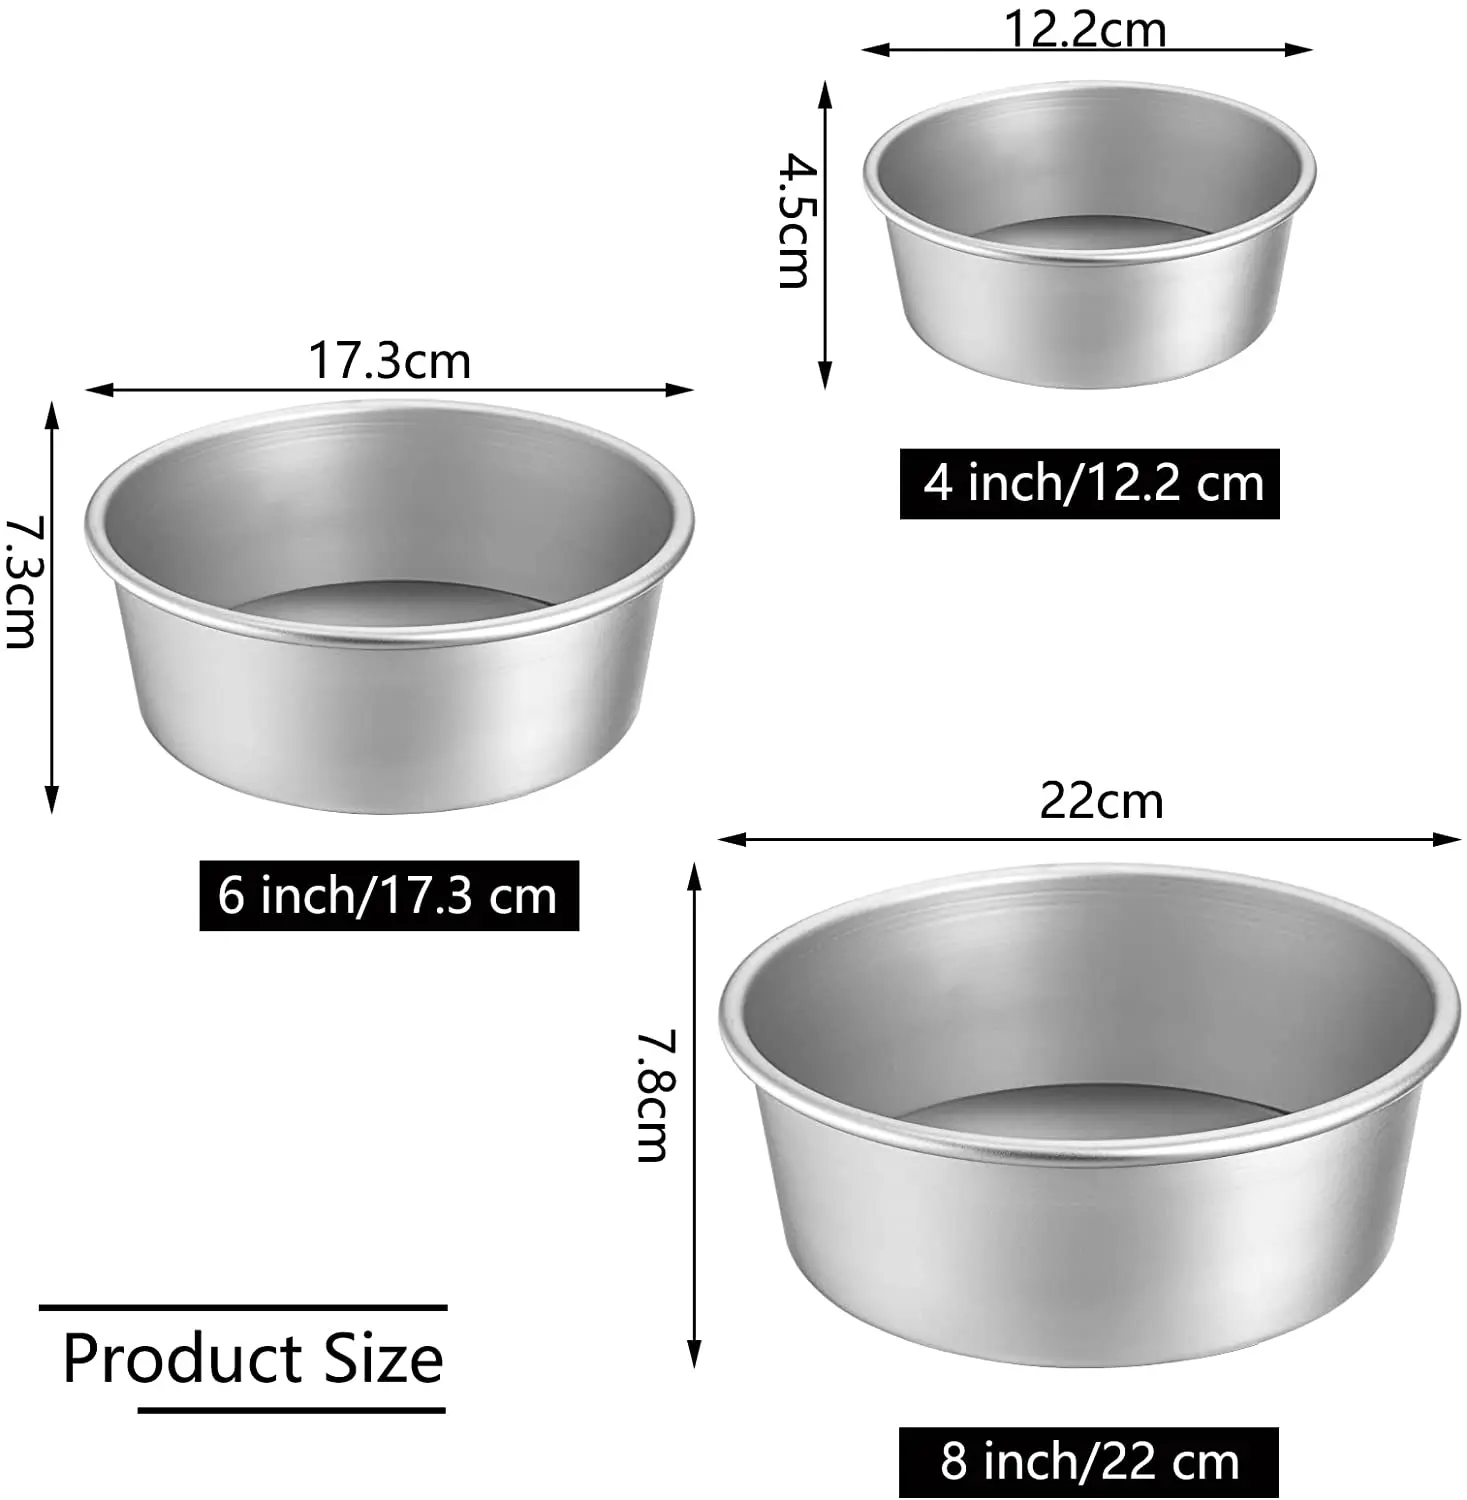 8 inch Round Cake Pan Stainless Steel Baking Pan with Removable Bottom for Birthday Wedding Tier Cake One-Piece Molding Leakproof Easy Clean, Other